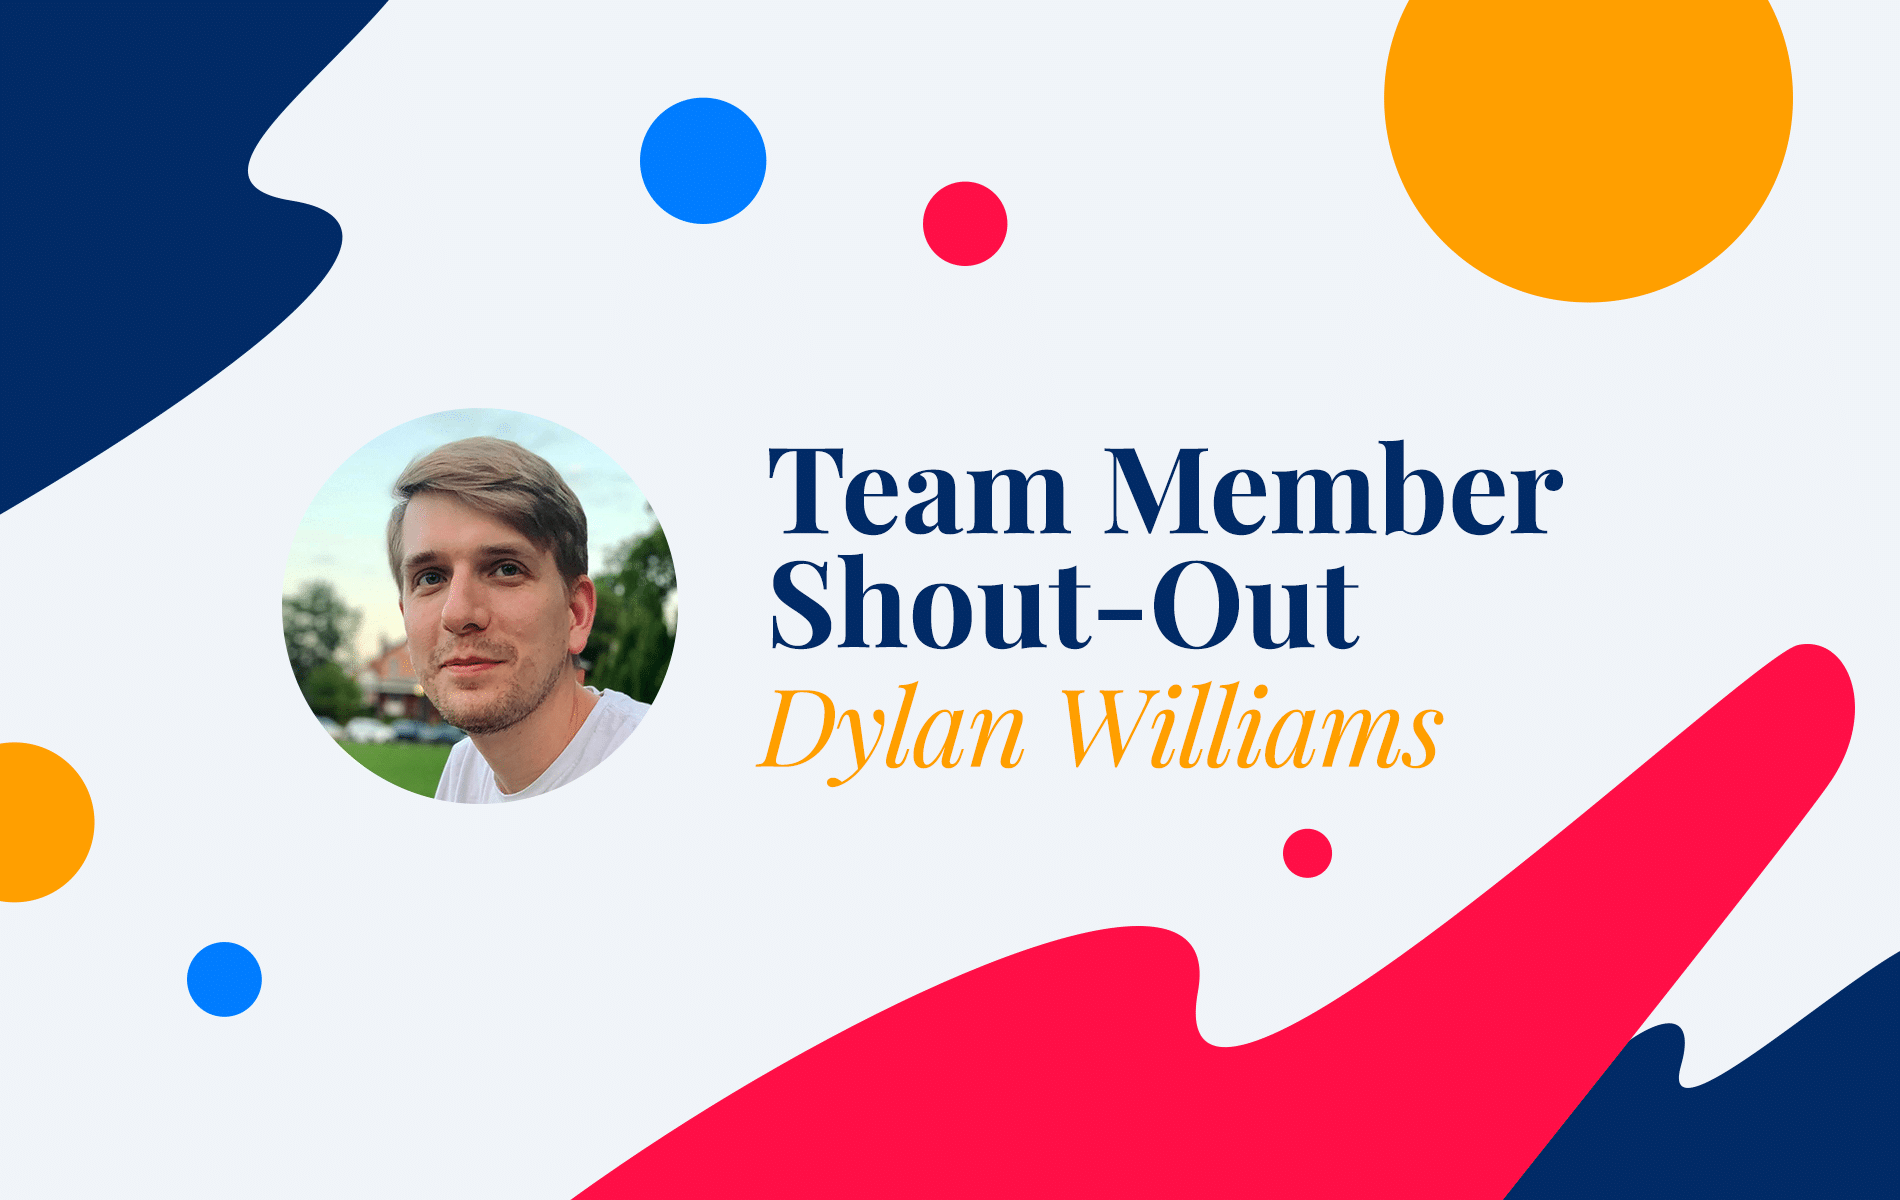 Team Member Shout-Out: Dylan Williams